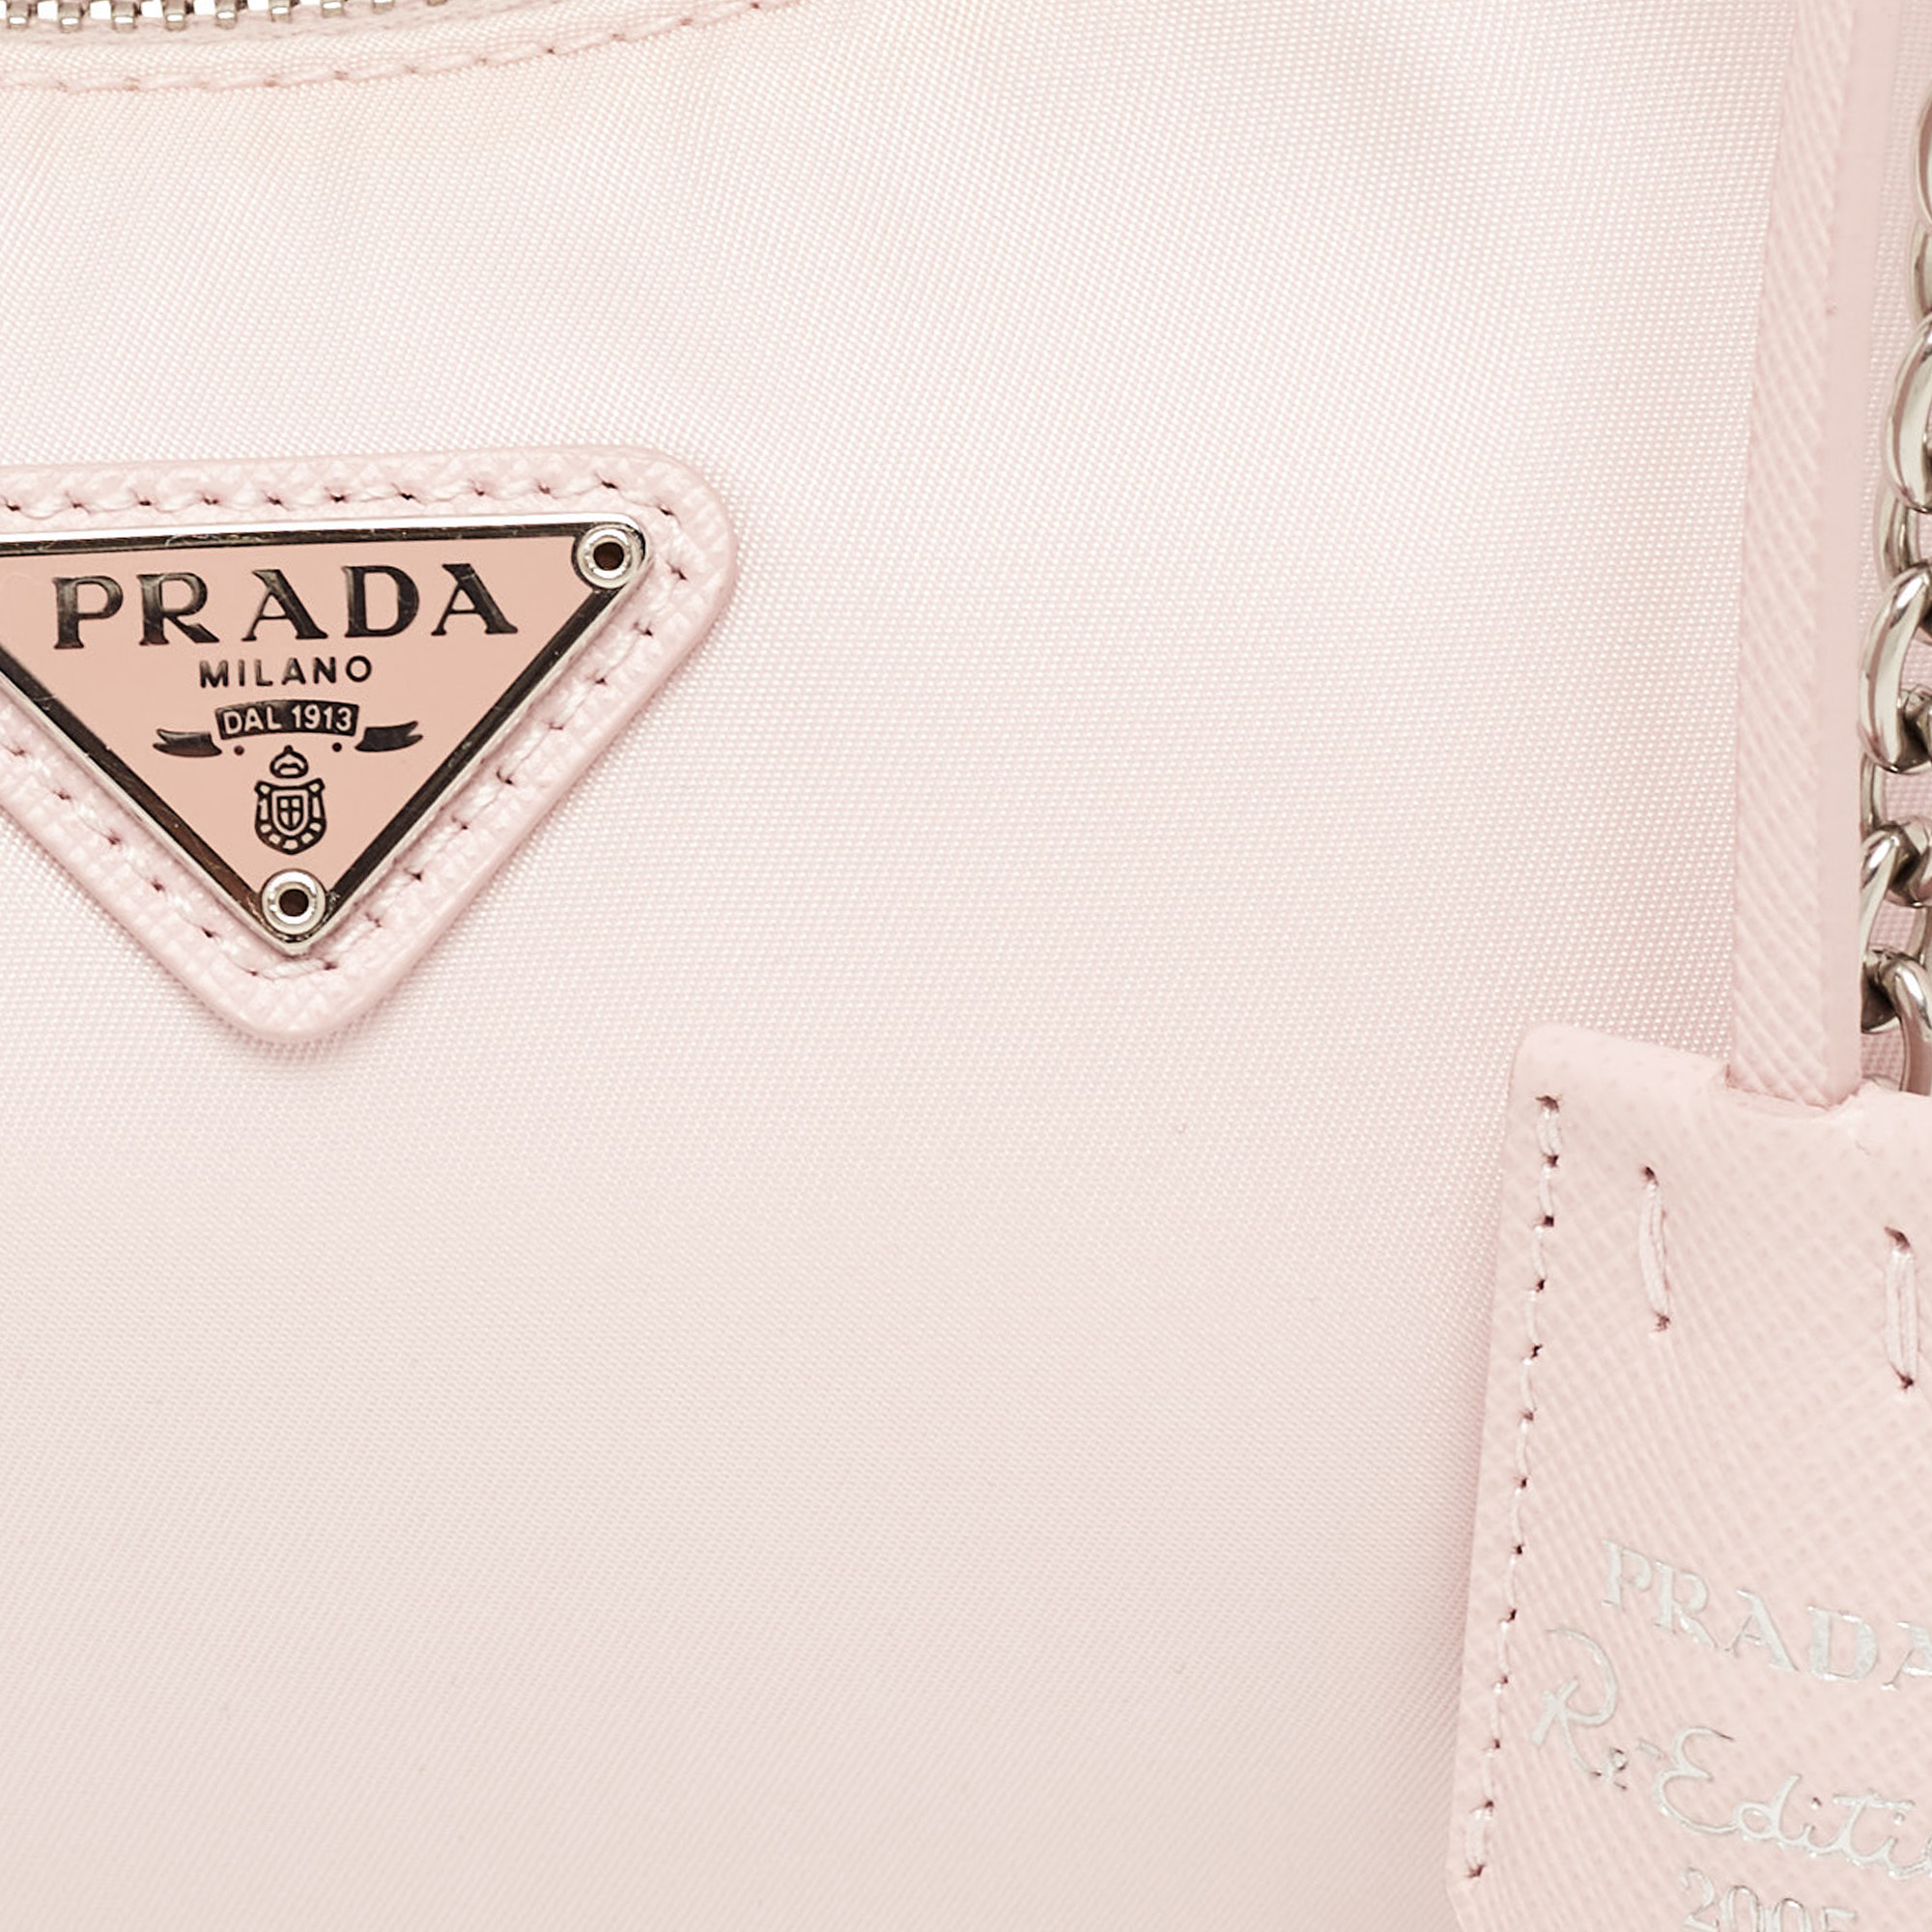 Prada Light Pink Nylon And Leather Re-Edition 2005 Baguette Bag